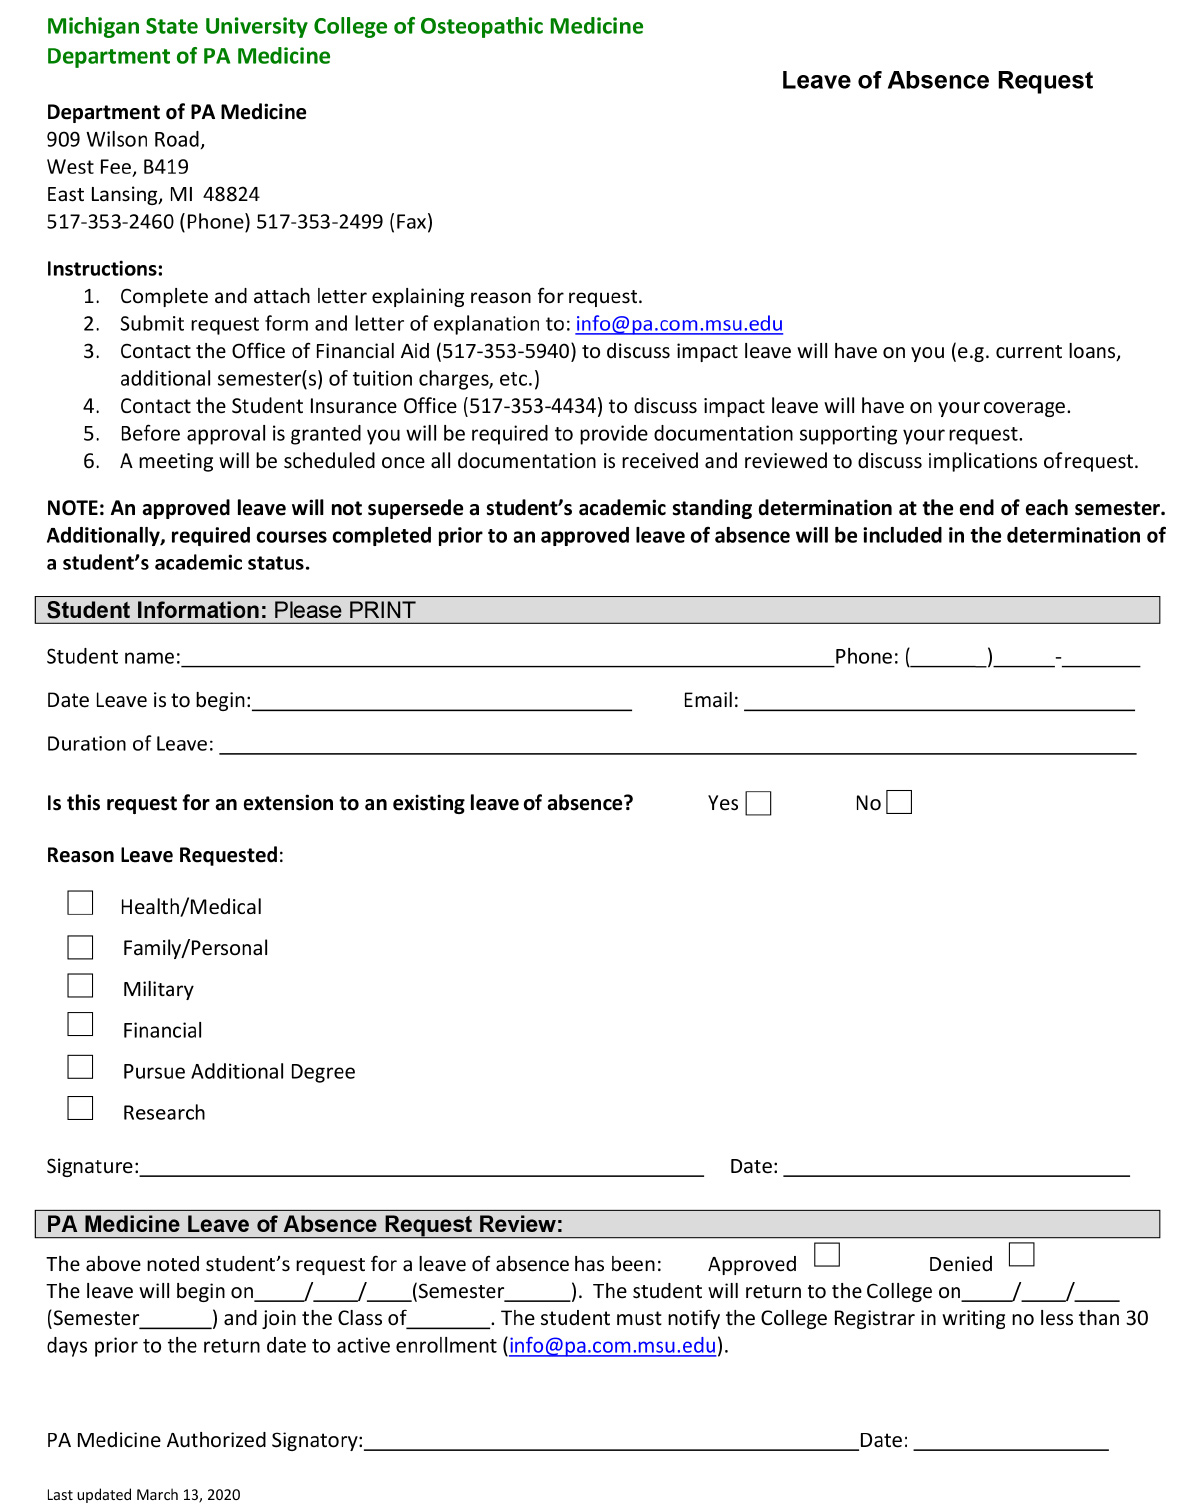 Leave-of-Absence-Request-Form